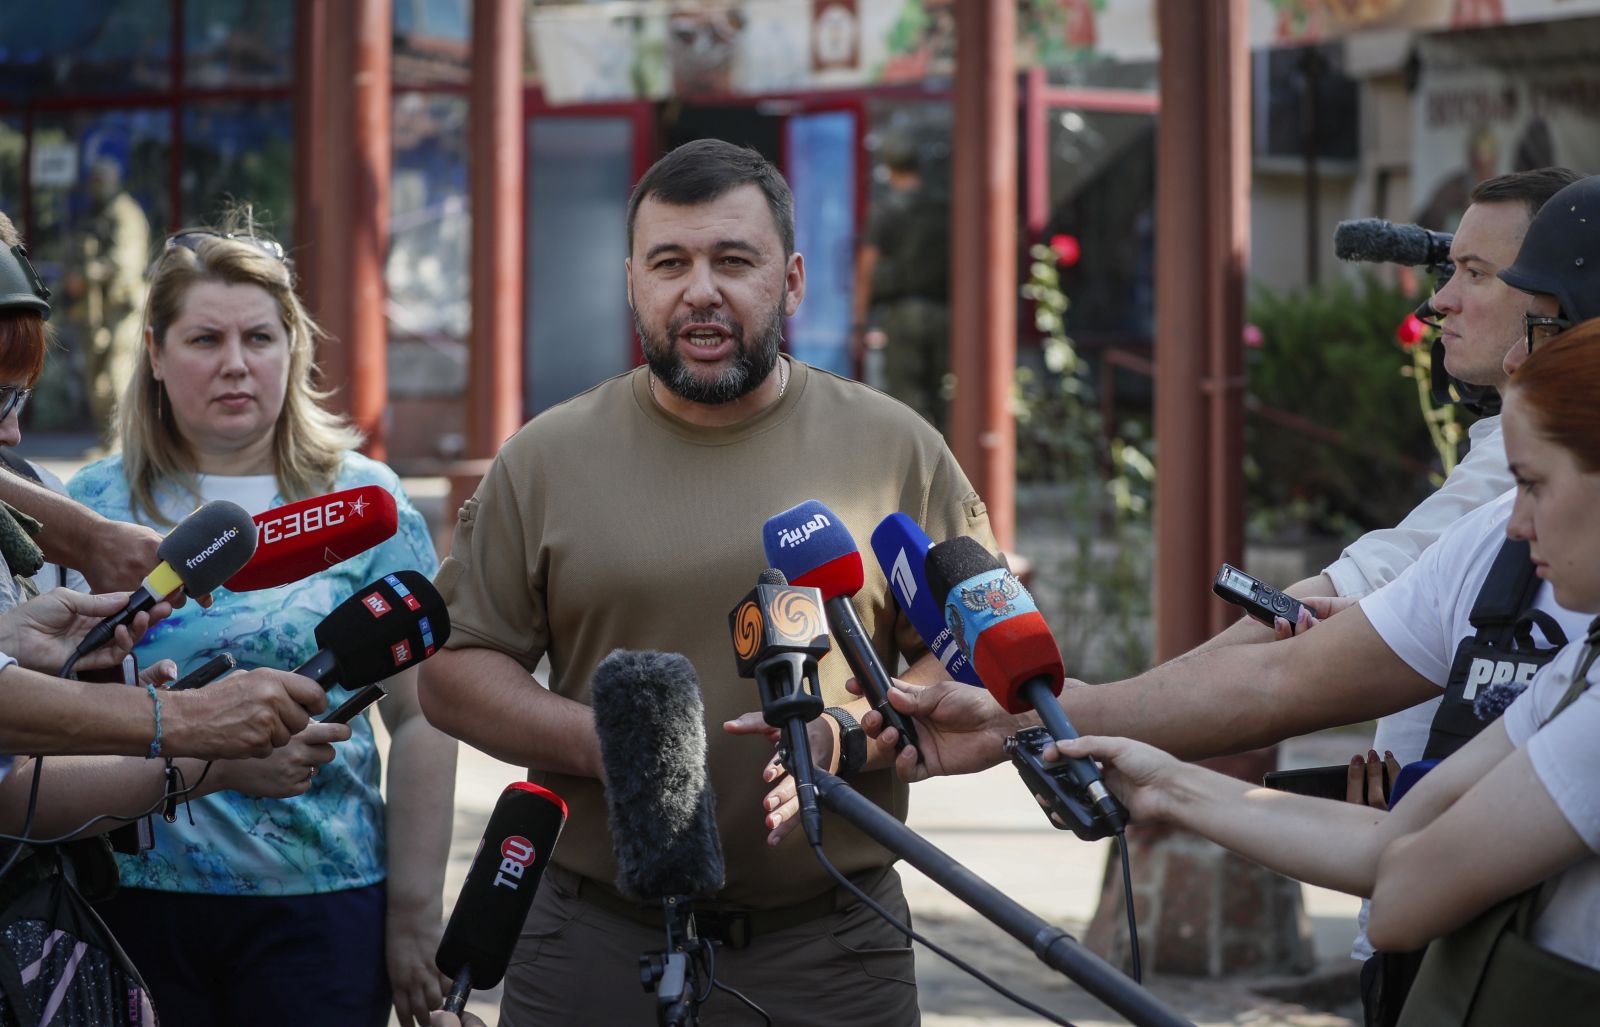 epa10147927 A picture taken during a visit to Donetsk organised by the Russian military shows Head of the self-proclaimed Donetsk People's Republic Denis Pushilin speaking with journalists near hotel Central damaged after shelling in Donetsk, Ukraine, 30 August 2022. On 24 February 2022 Russian troops entered the Ukrainian territory in what the Russian president declared a 'Special Military Operation', starting an armed conflict that has provoked destruction and a humanitarian crisis.  EPA/YURI KOCHETKOV